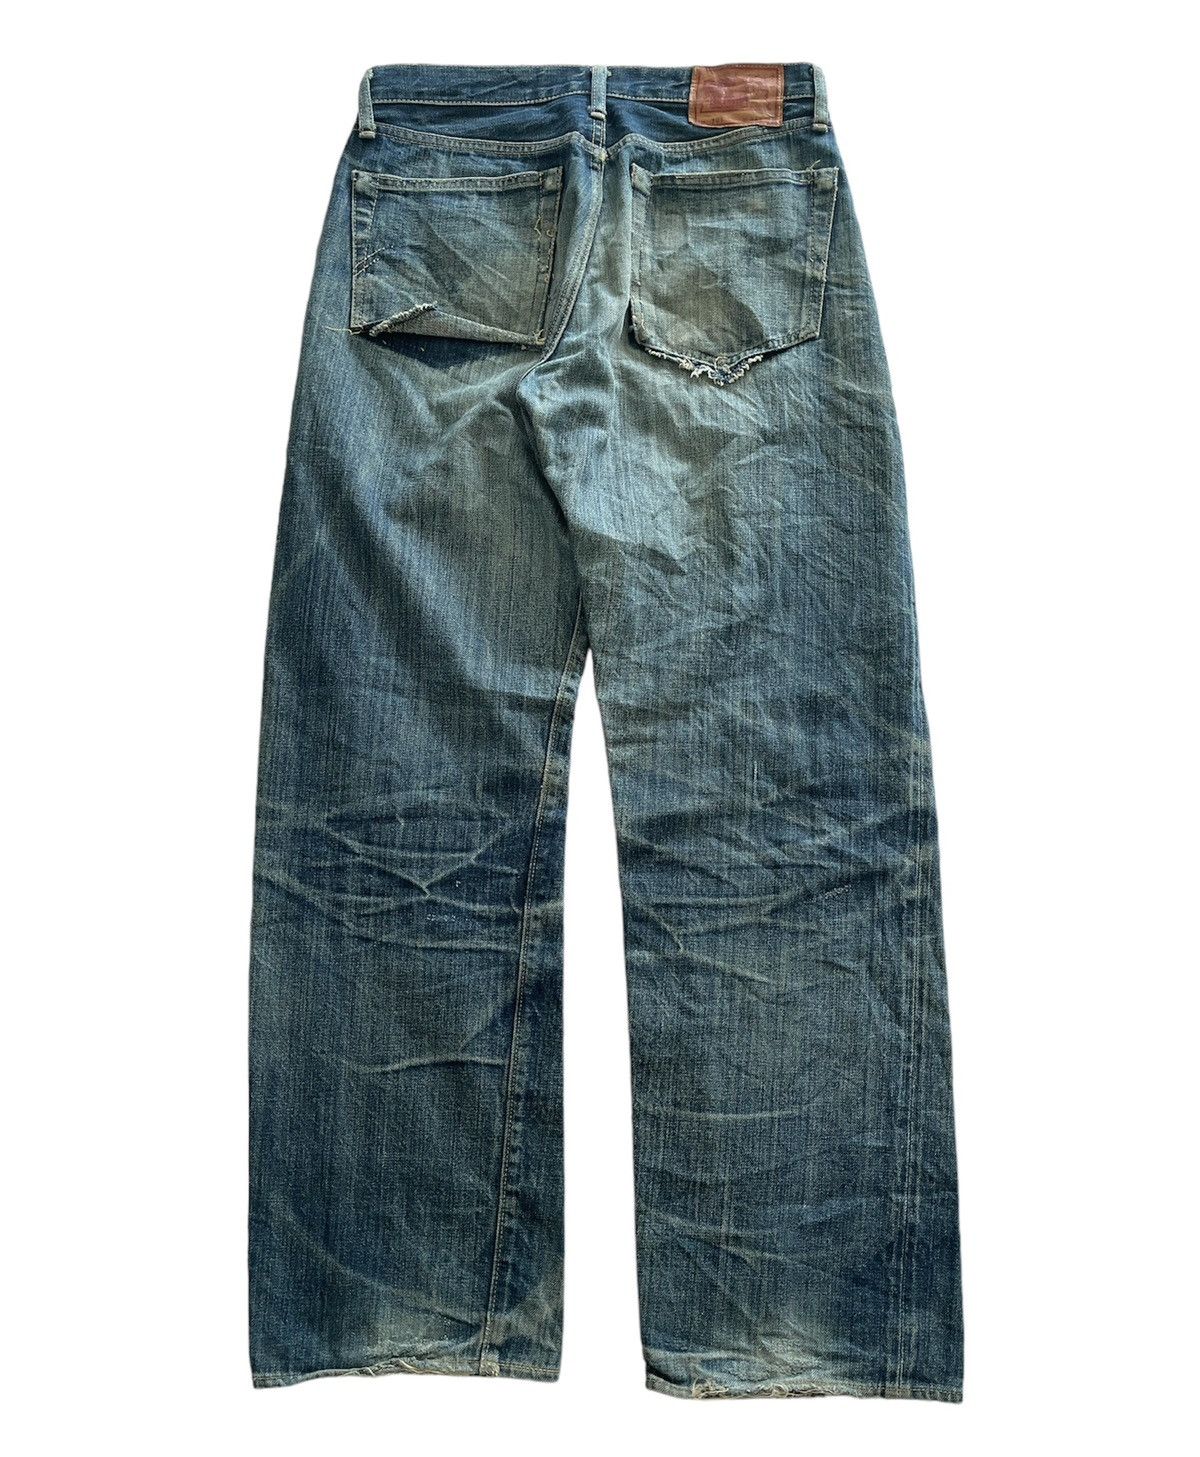 Japanese Brand - JAPANESE REPRO DENIM JEANS, BARNS OUTFITTERS & CO BRAND - 2